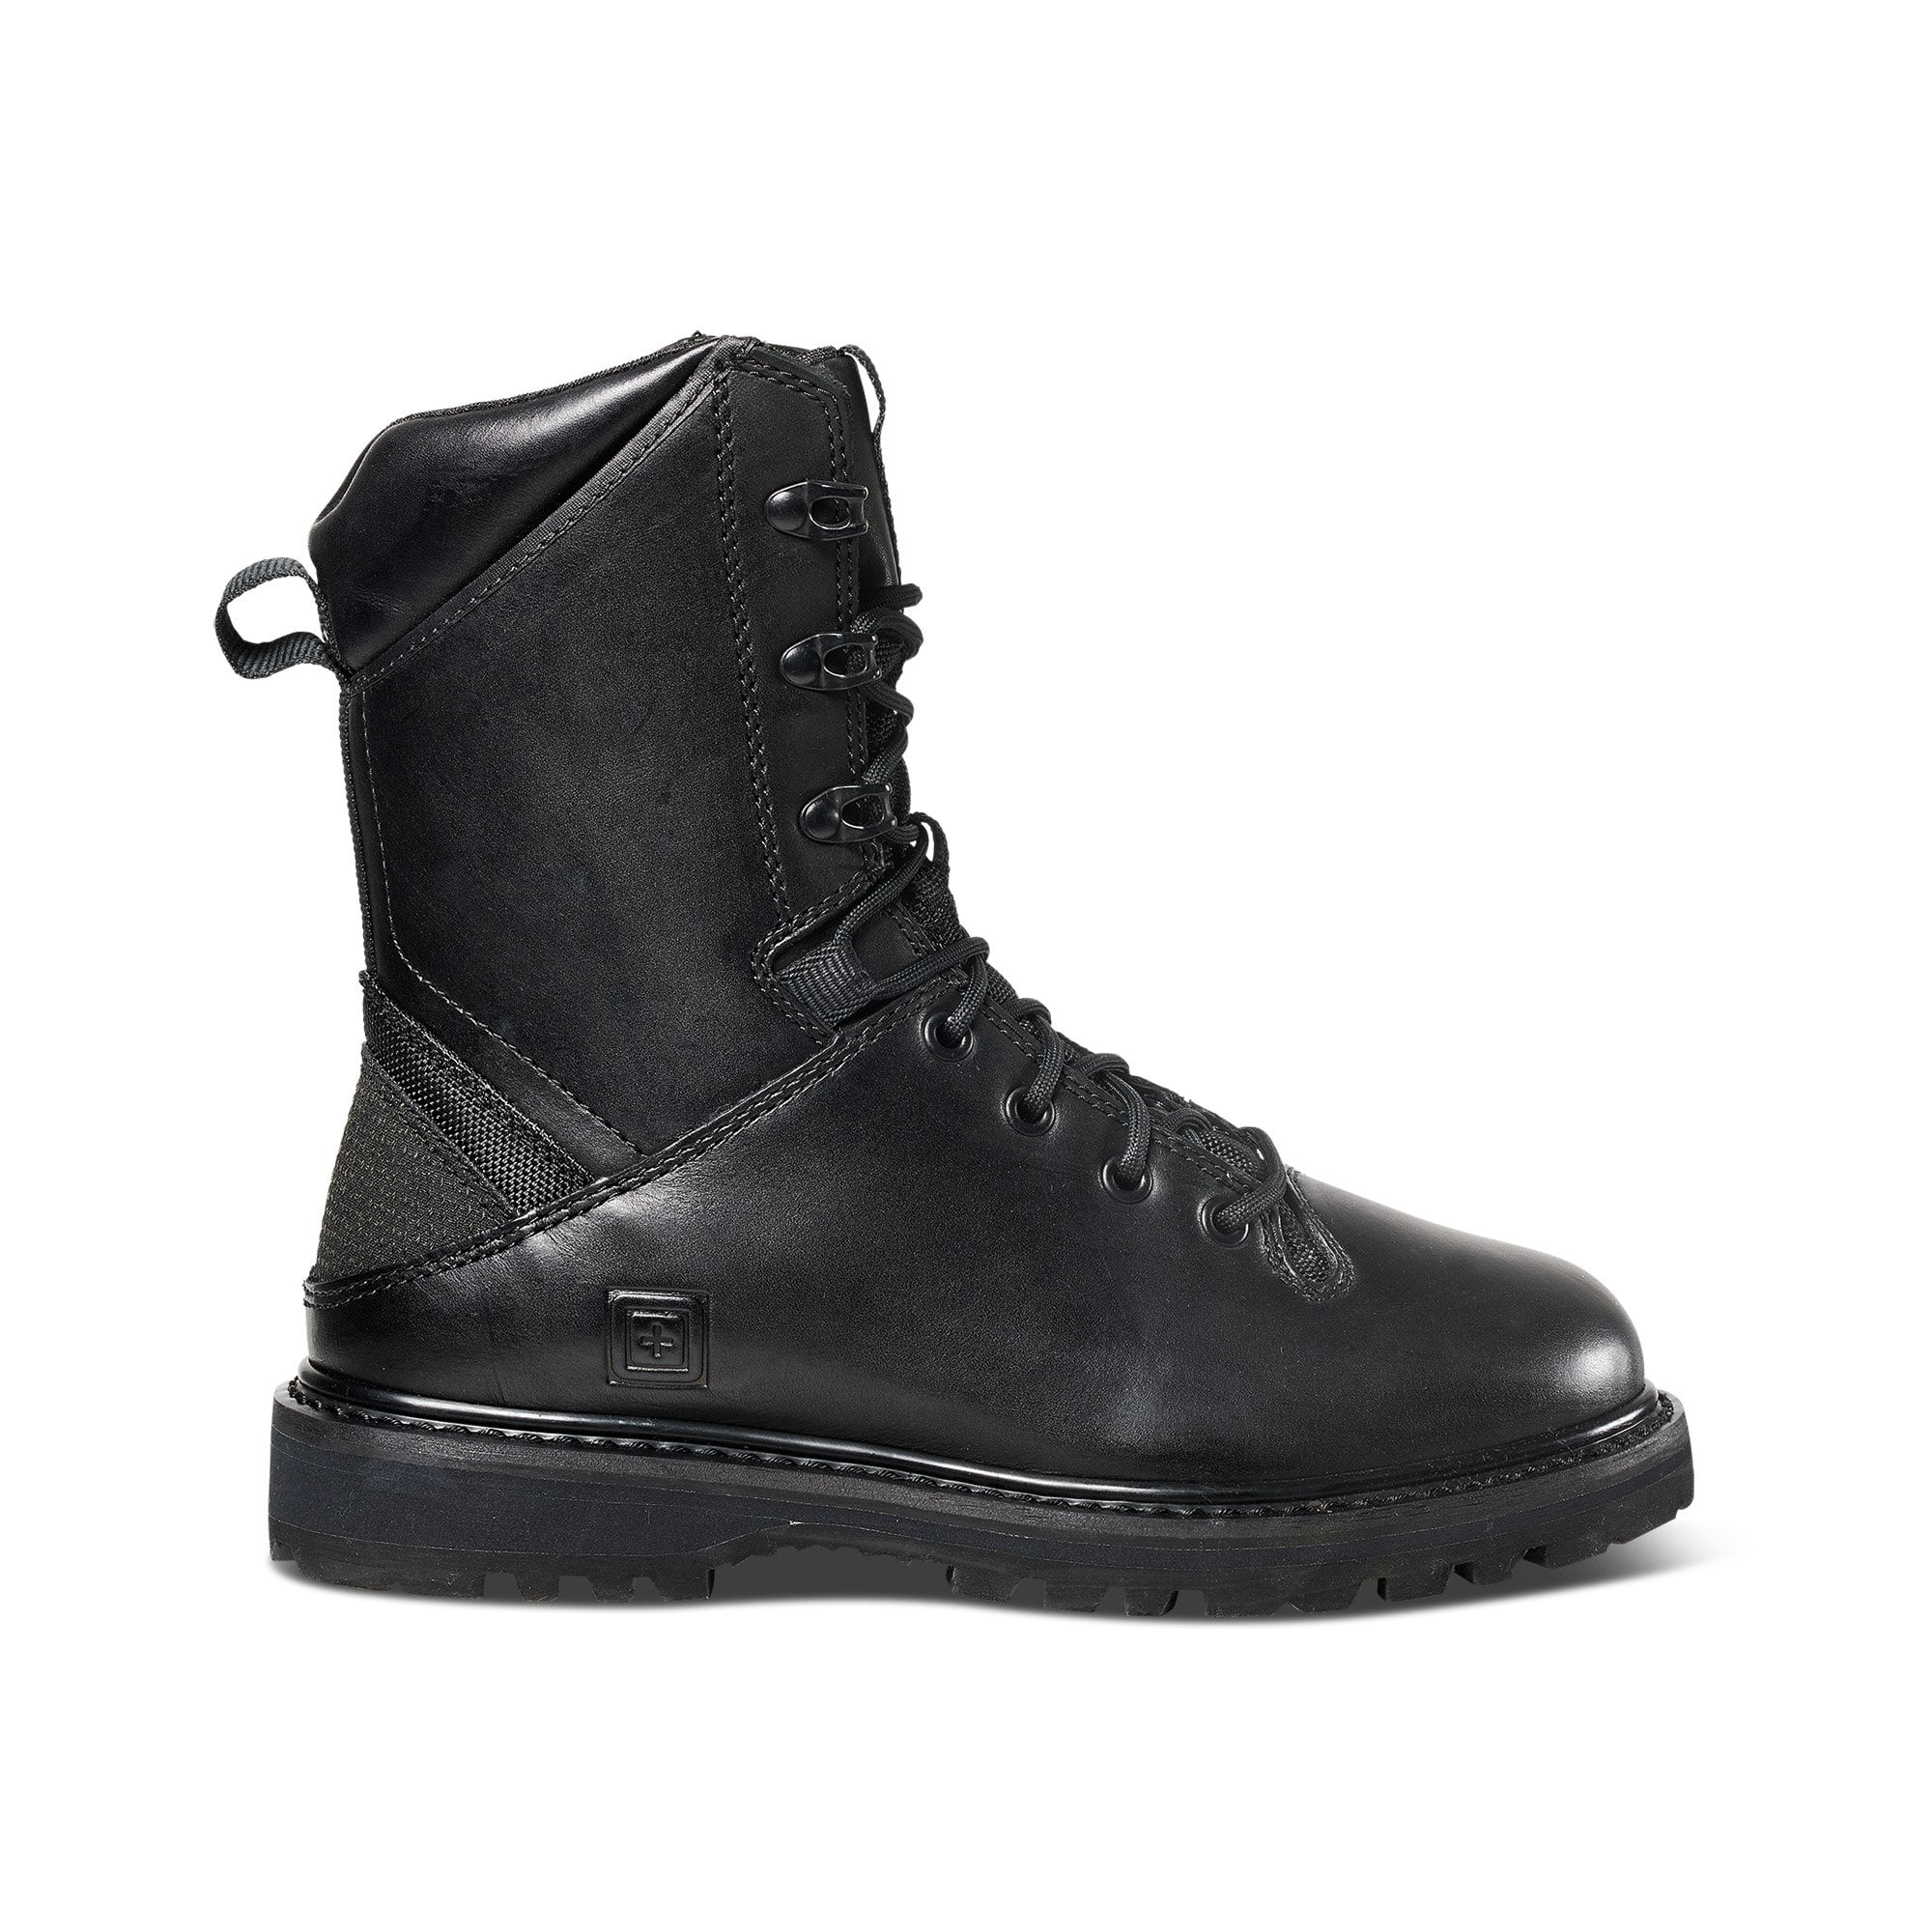 Style 12381 Military and Tactical Boot 5.11 mens 8 Apex Tactical Boot Covert Pocket All Day Support